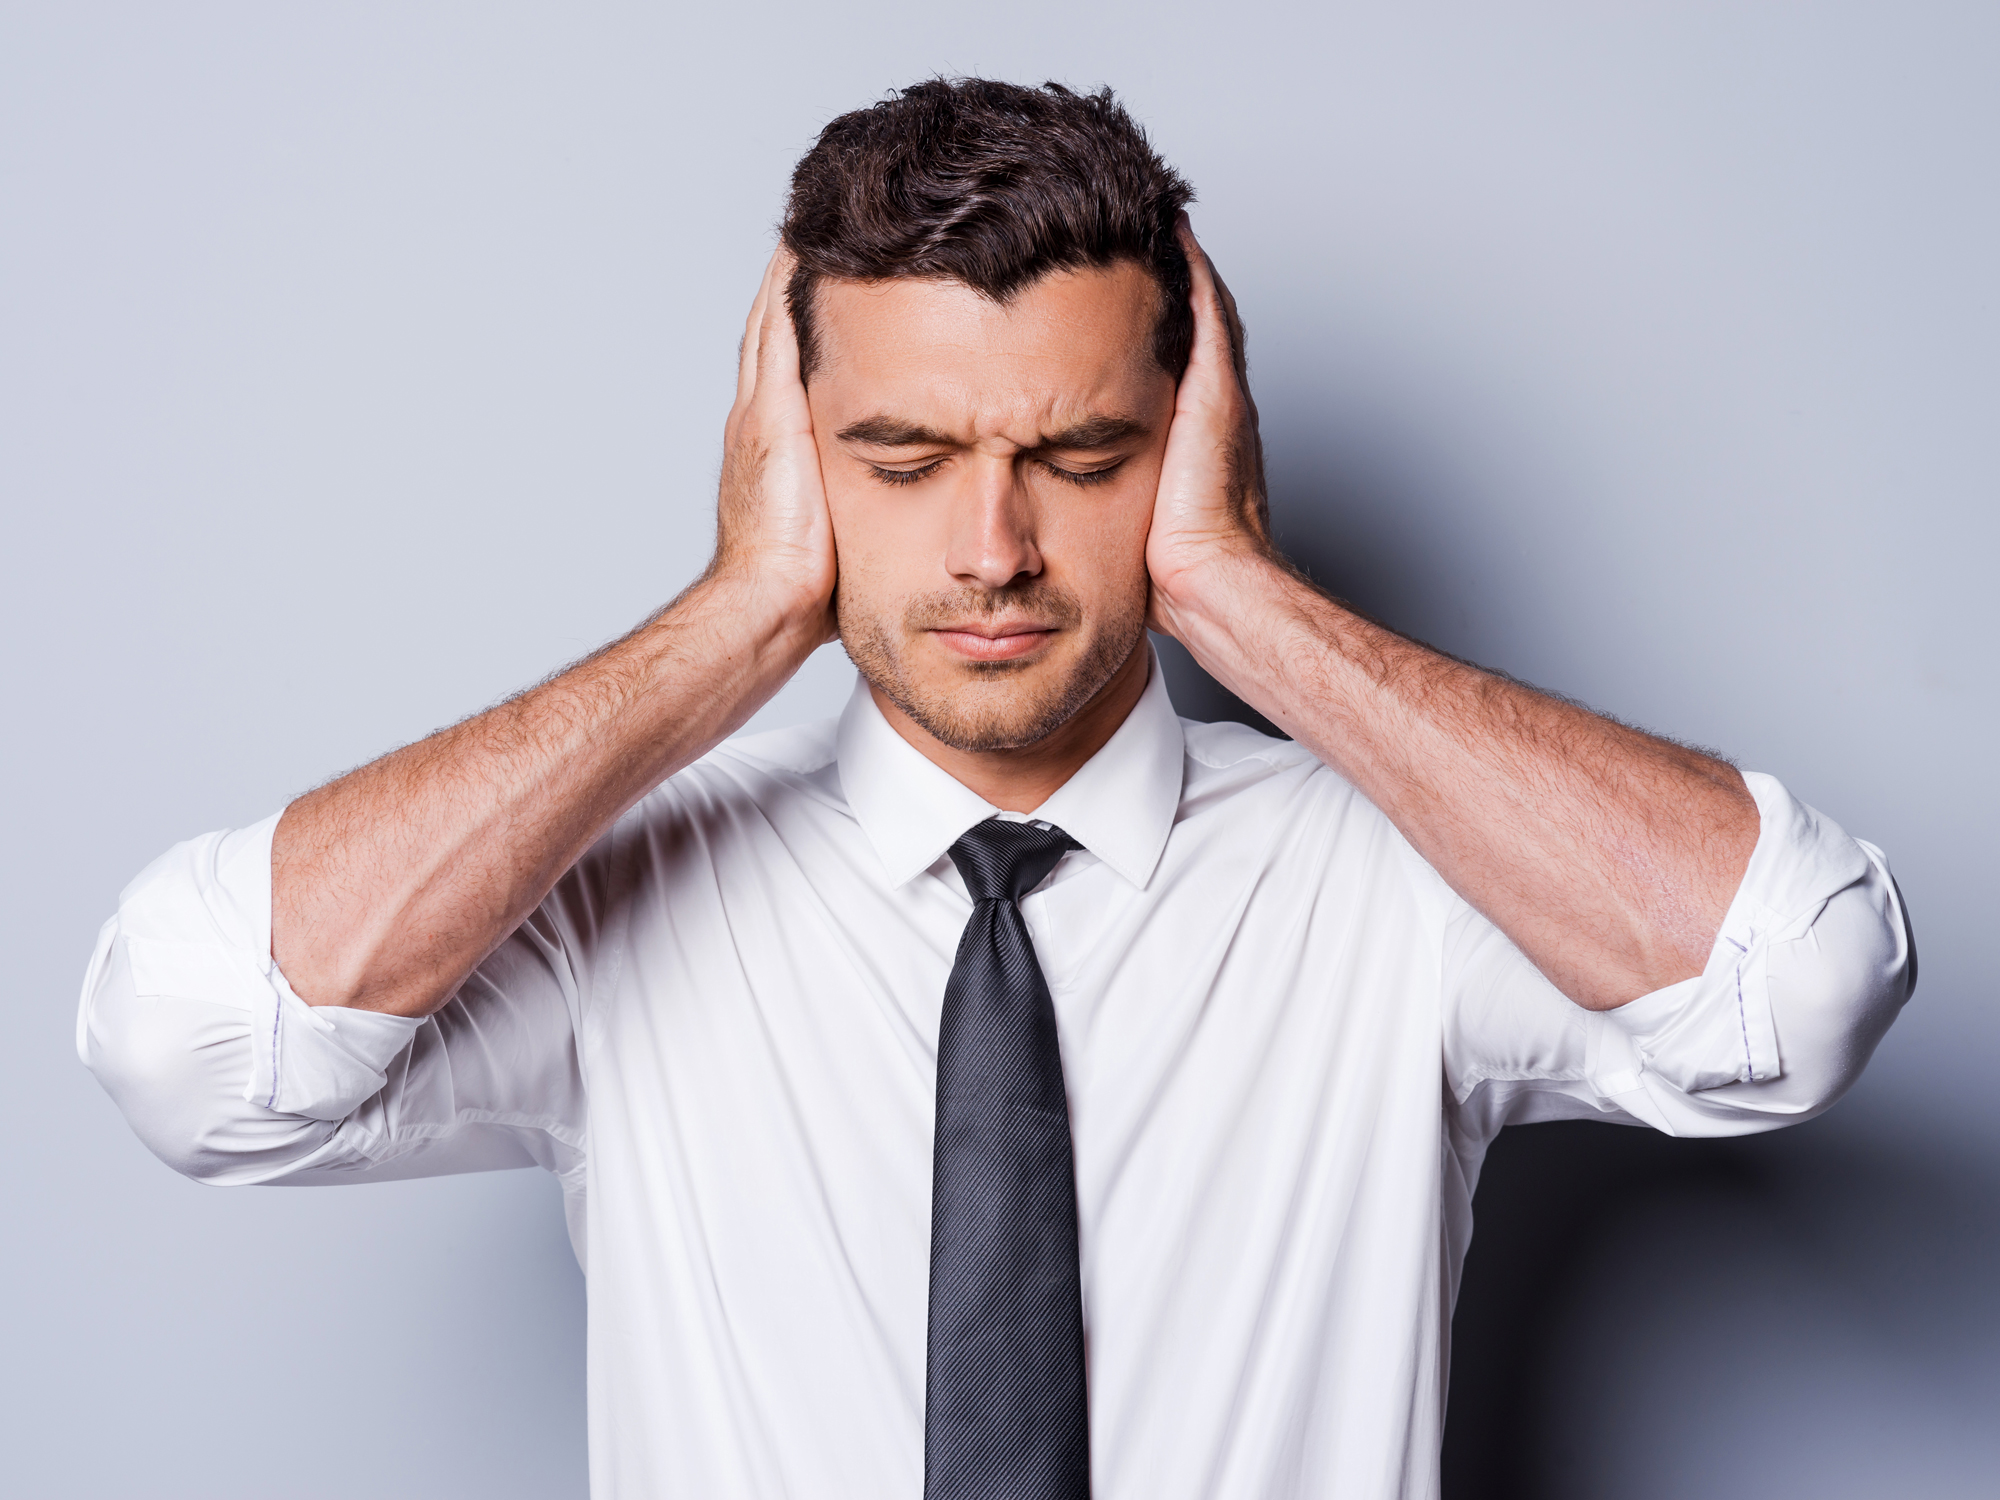 Tame tinnitus in 1 minute with this simple trick